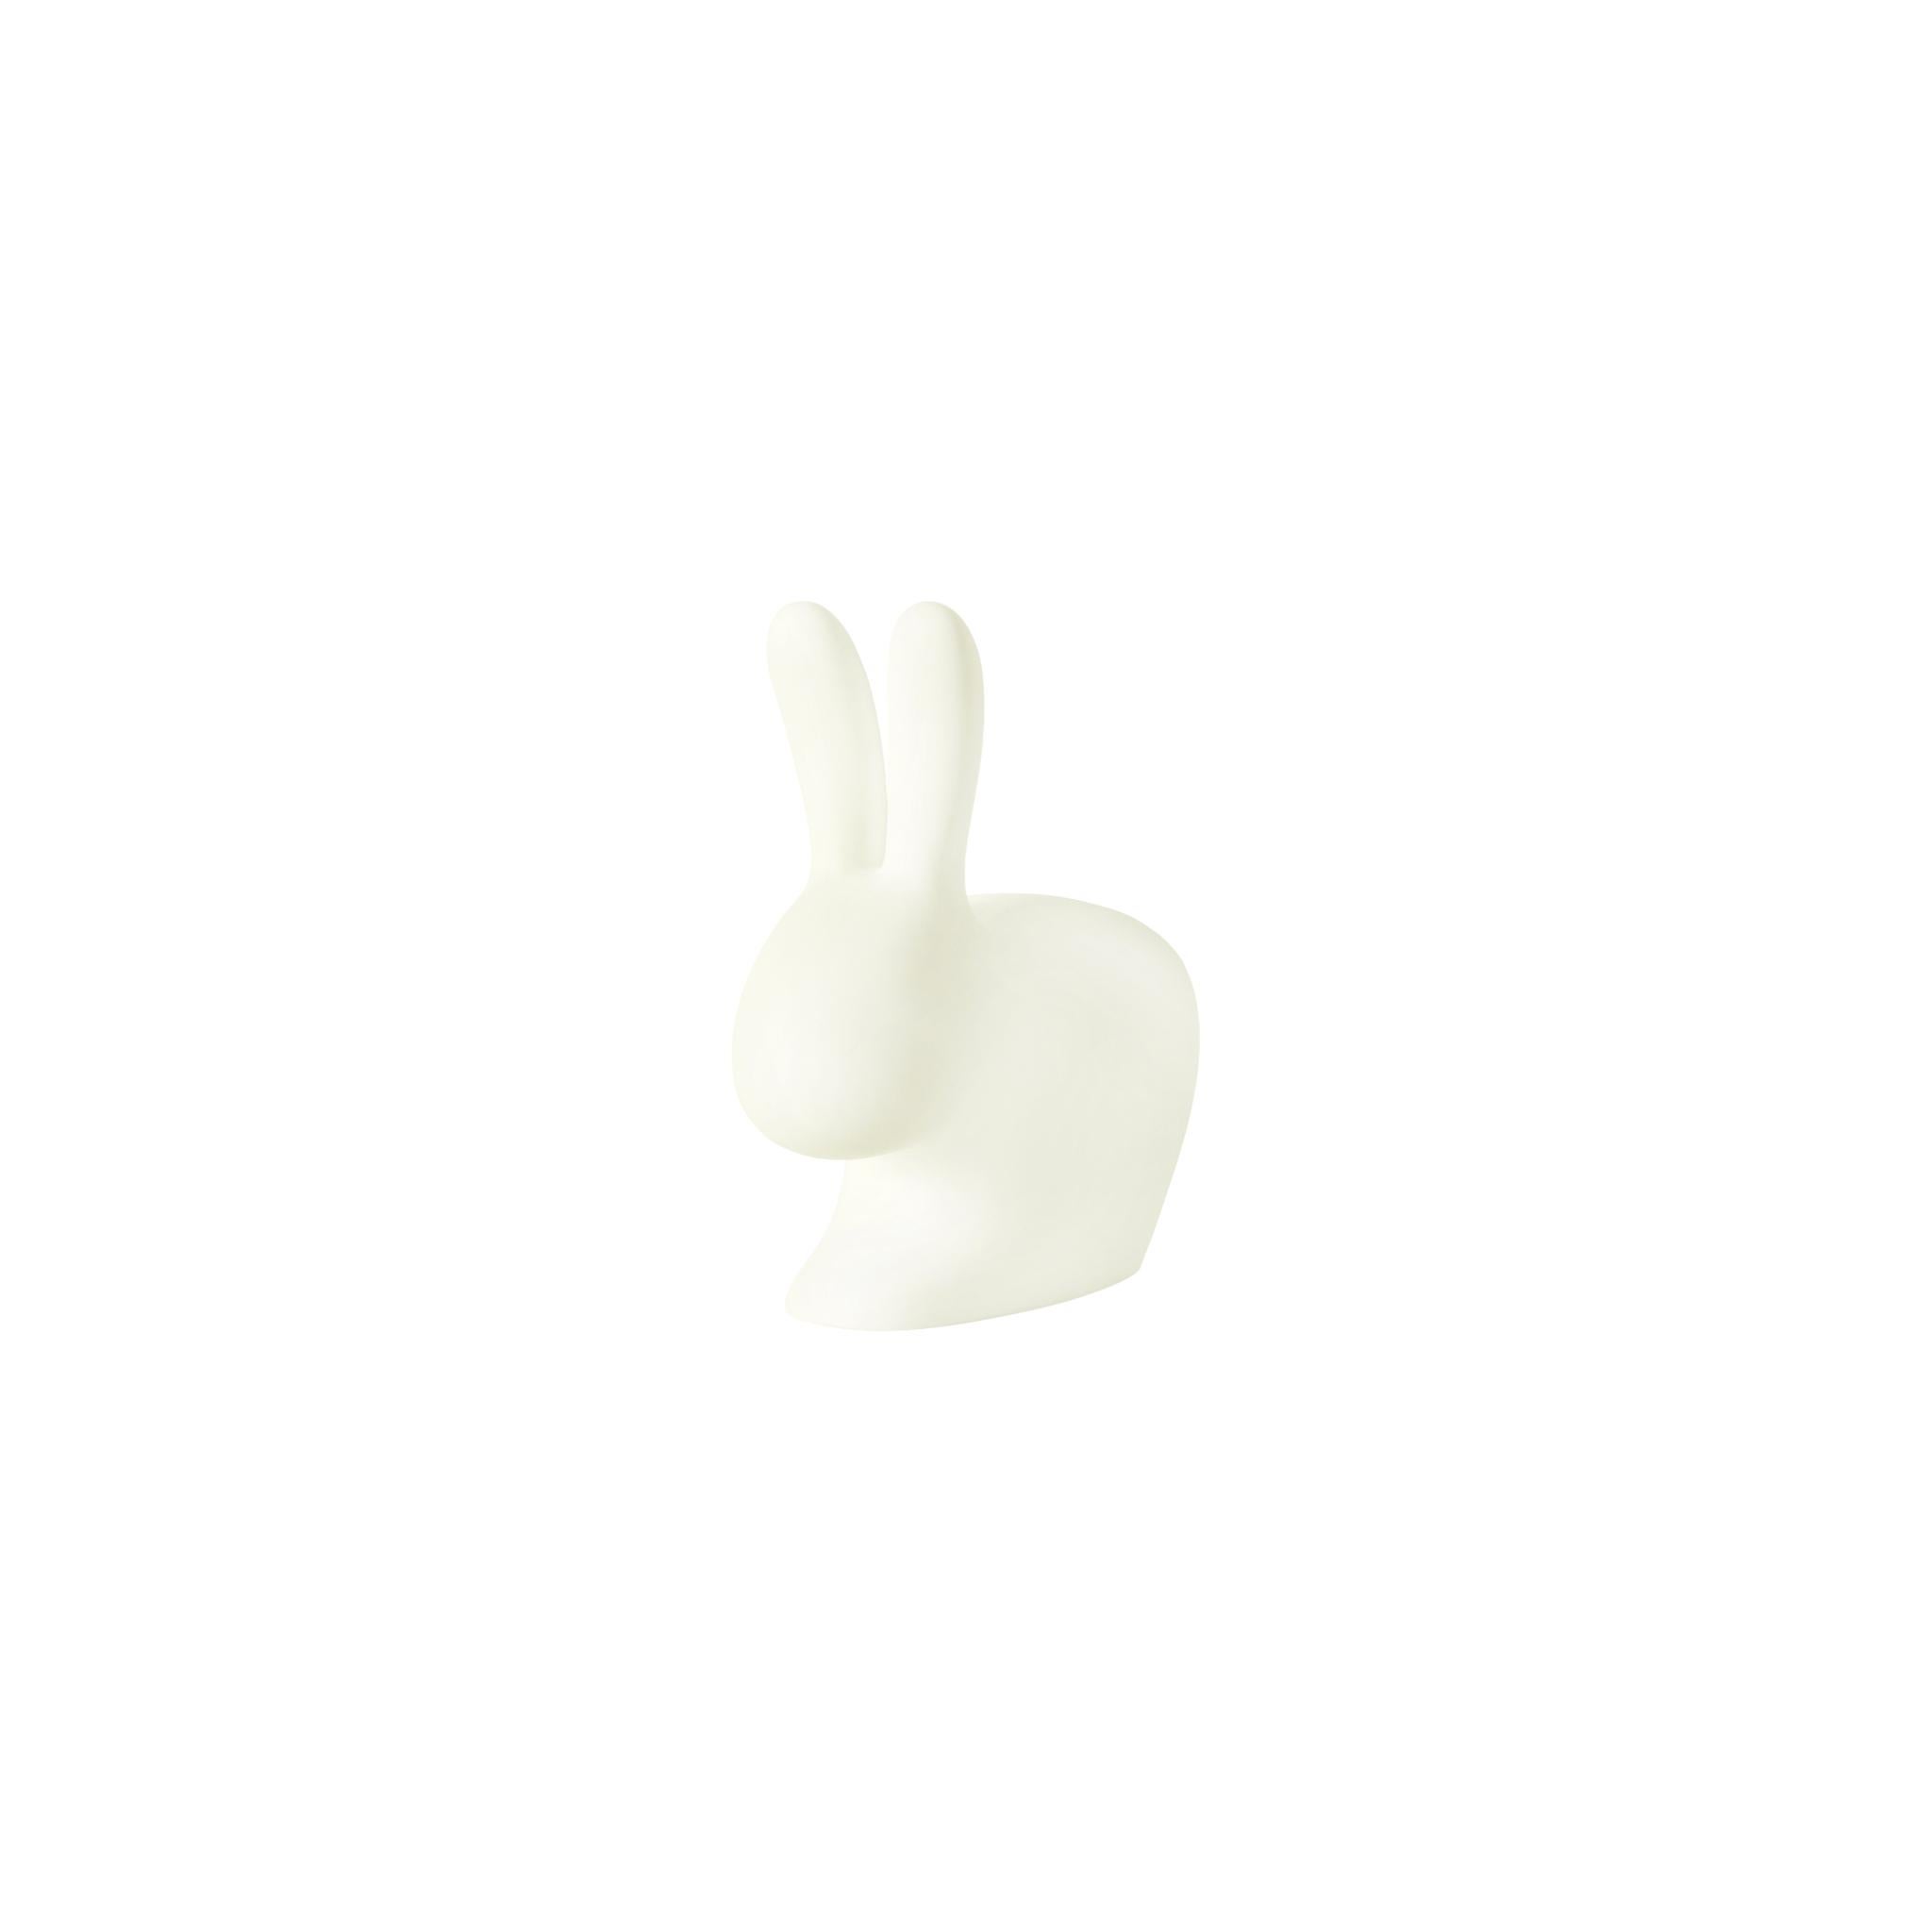 Rabbit XS is a wireless lamp designed by Stefano Giovannoni. It has a rechargeable battery, LED light and 16 different interchangeable RGB colors. Symbol of love and fertility, this little one will bring you good luck!

Wireless, with a